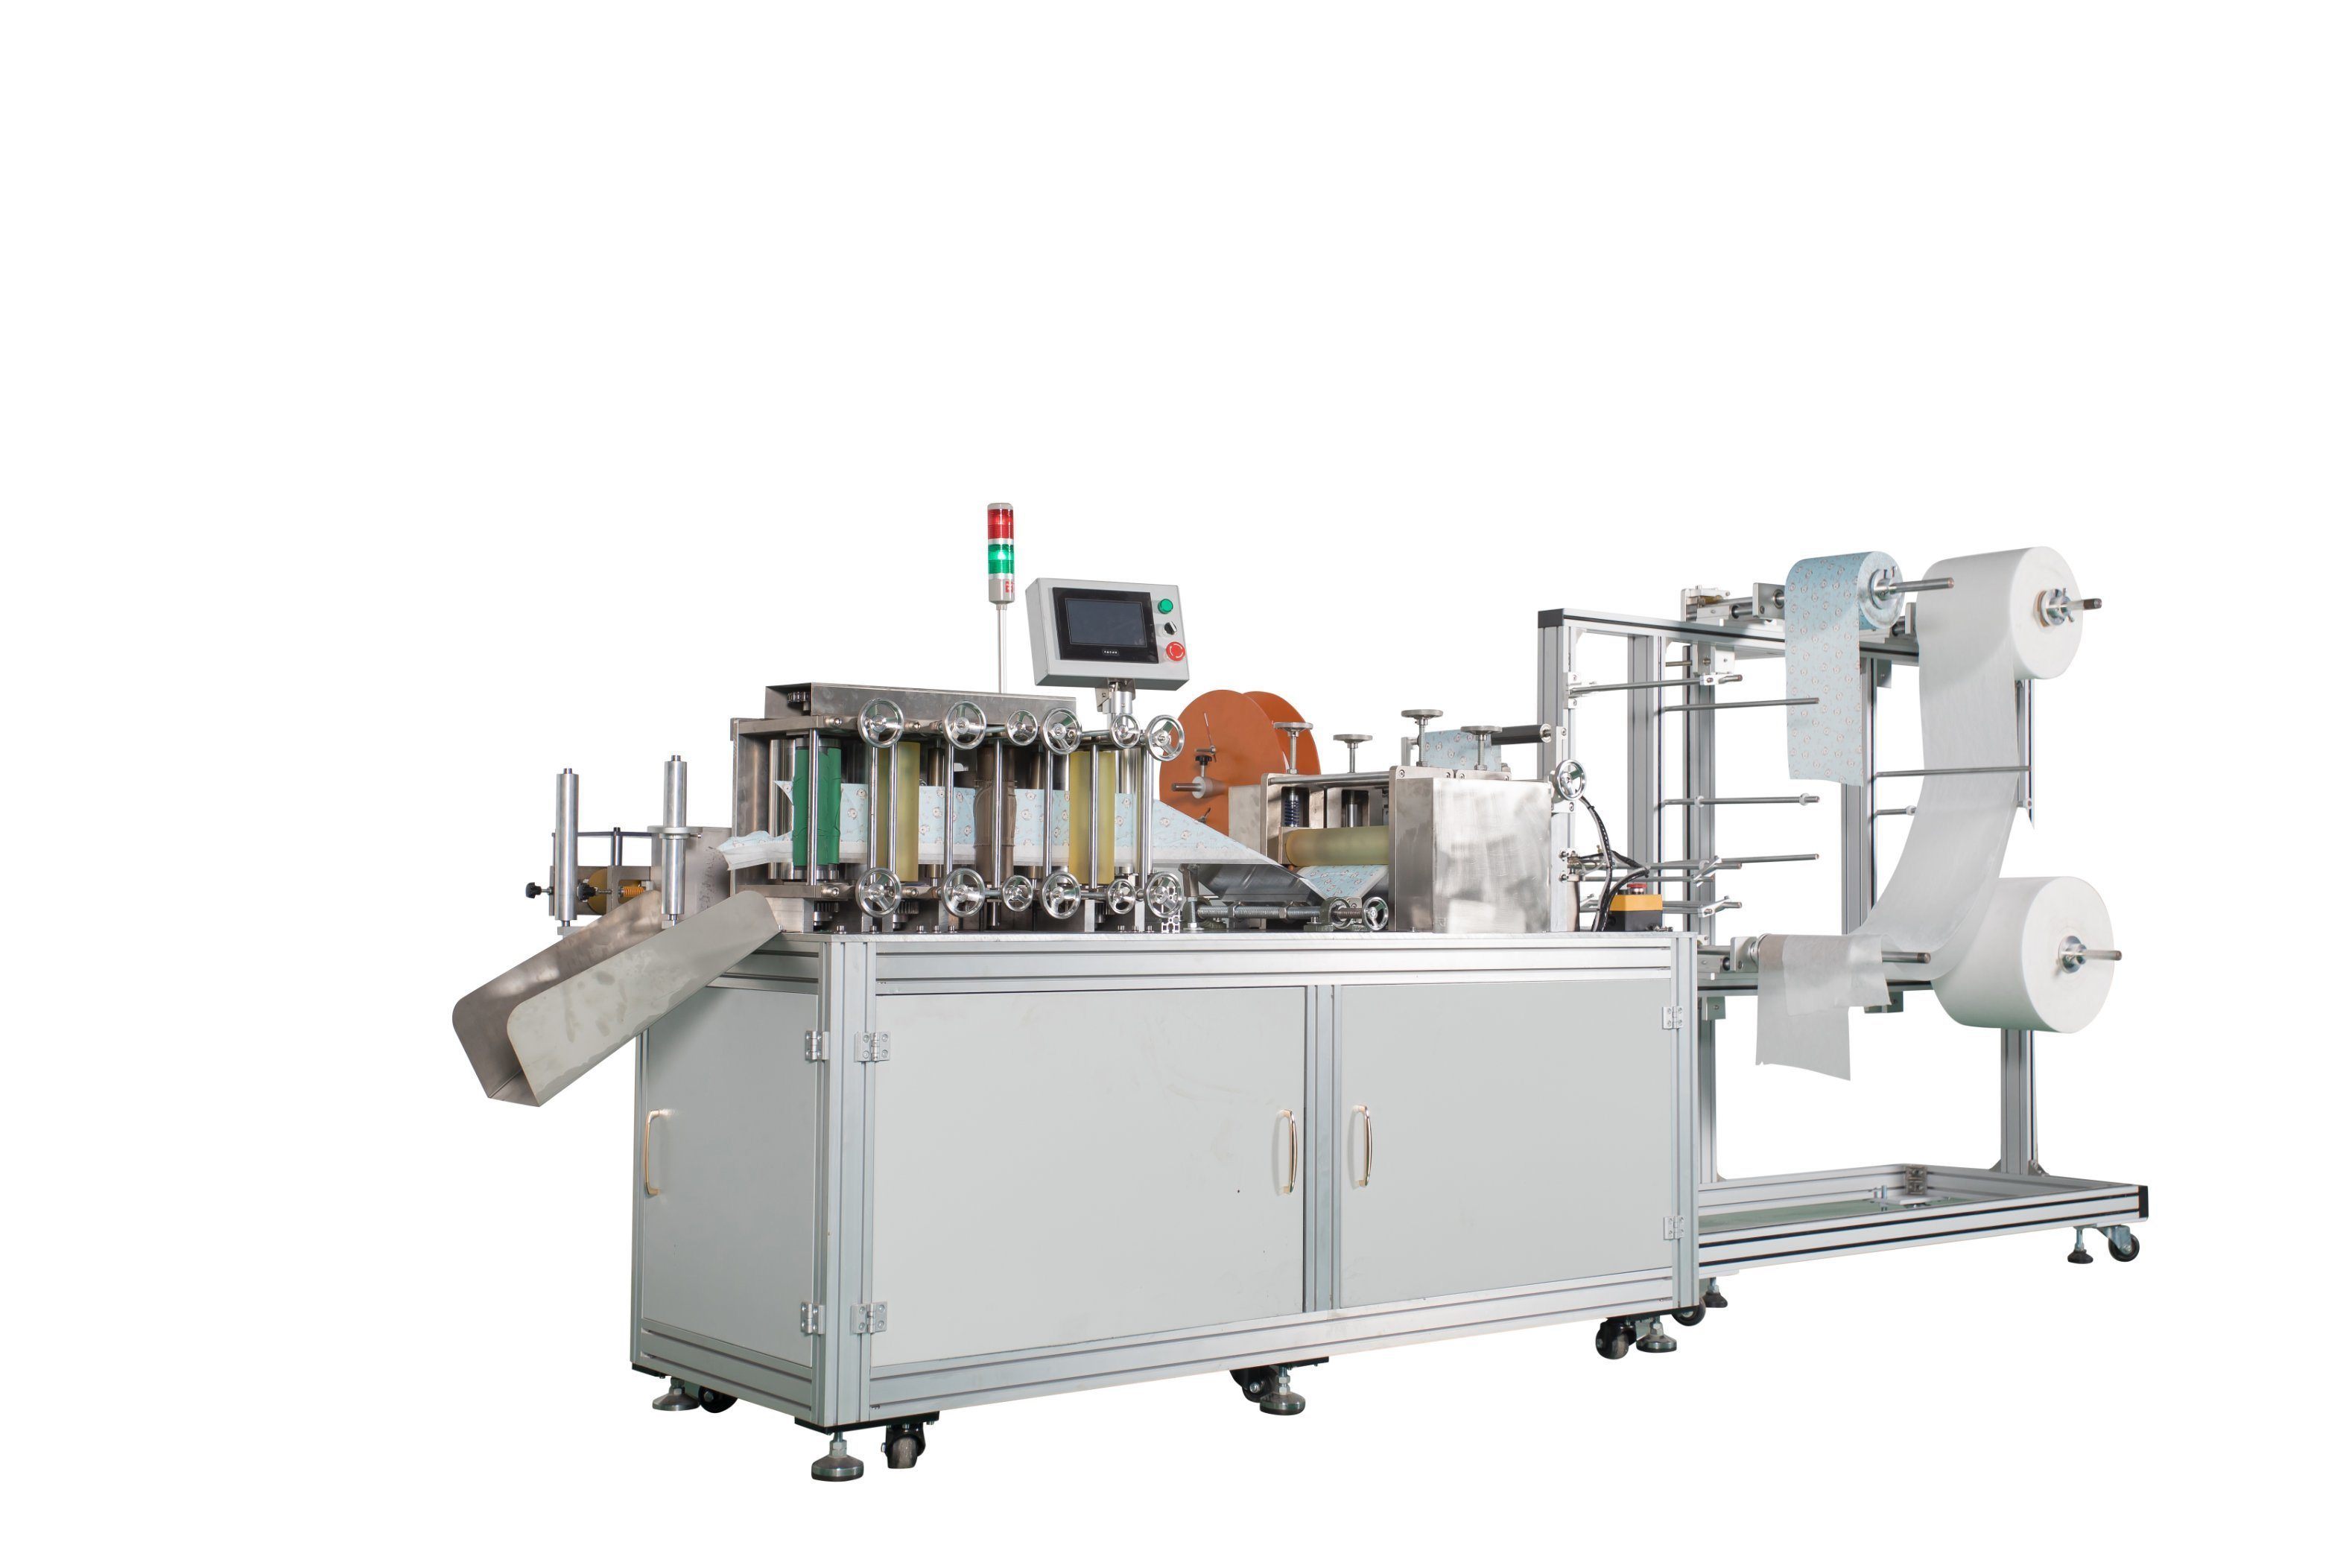 Fabric Strip Cutting Surgical Mask Machine Cotton Waste Process Outer Ear-Loop Welding Machine (Servo Motor Type)